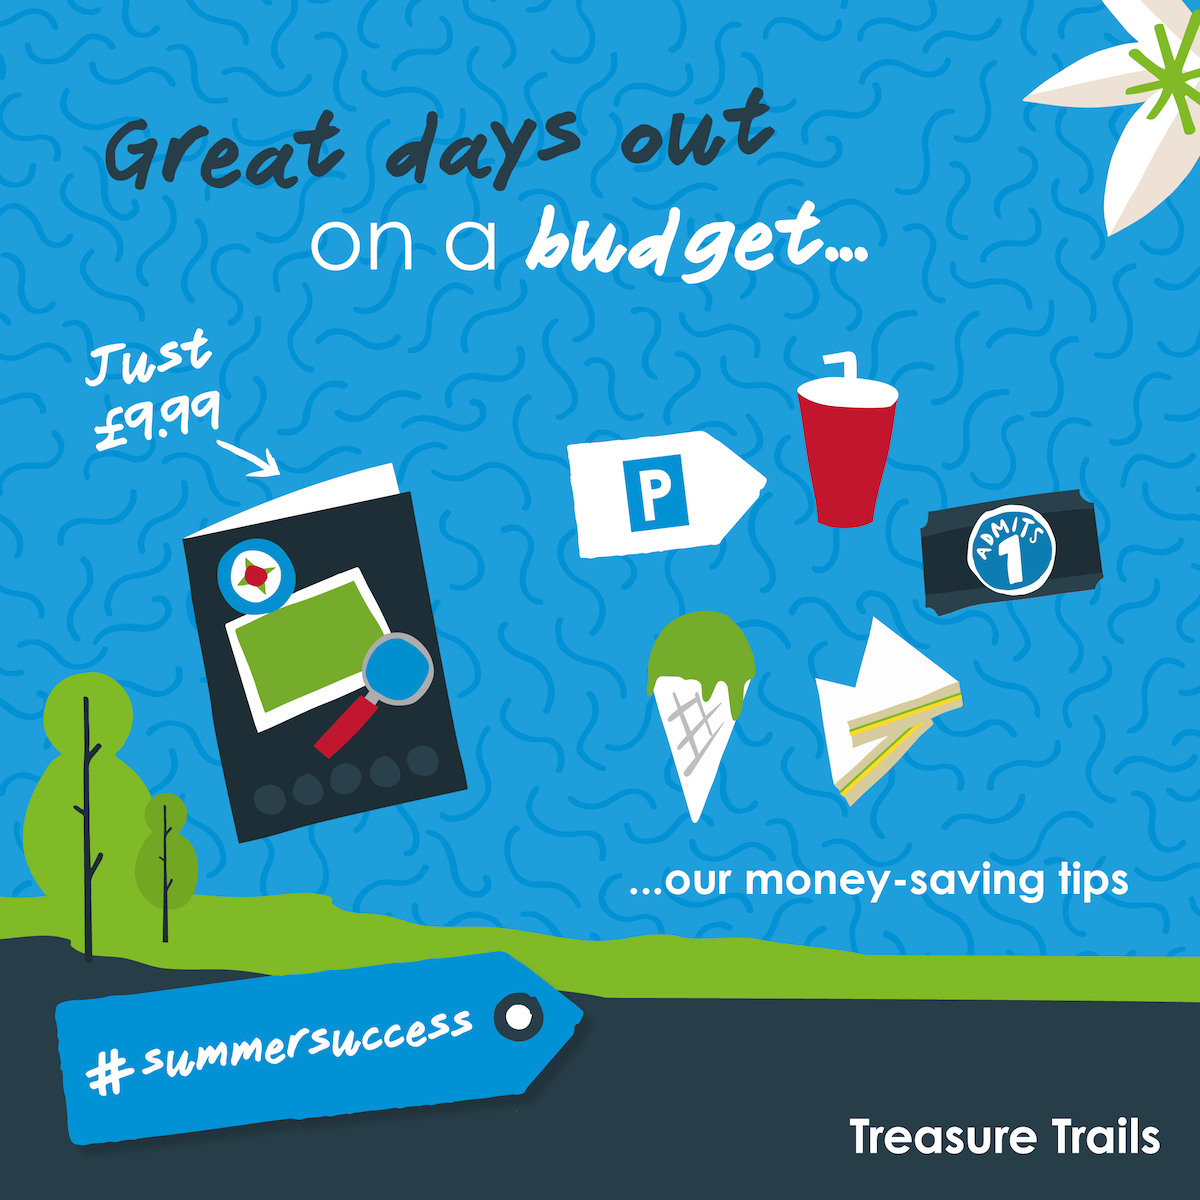 Great days out on a budget and how to save on getting there, refreshments and extra activities whem om a Trail